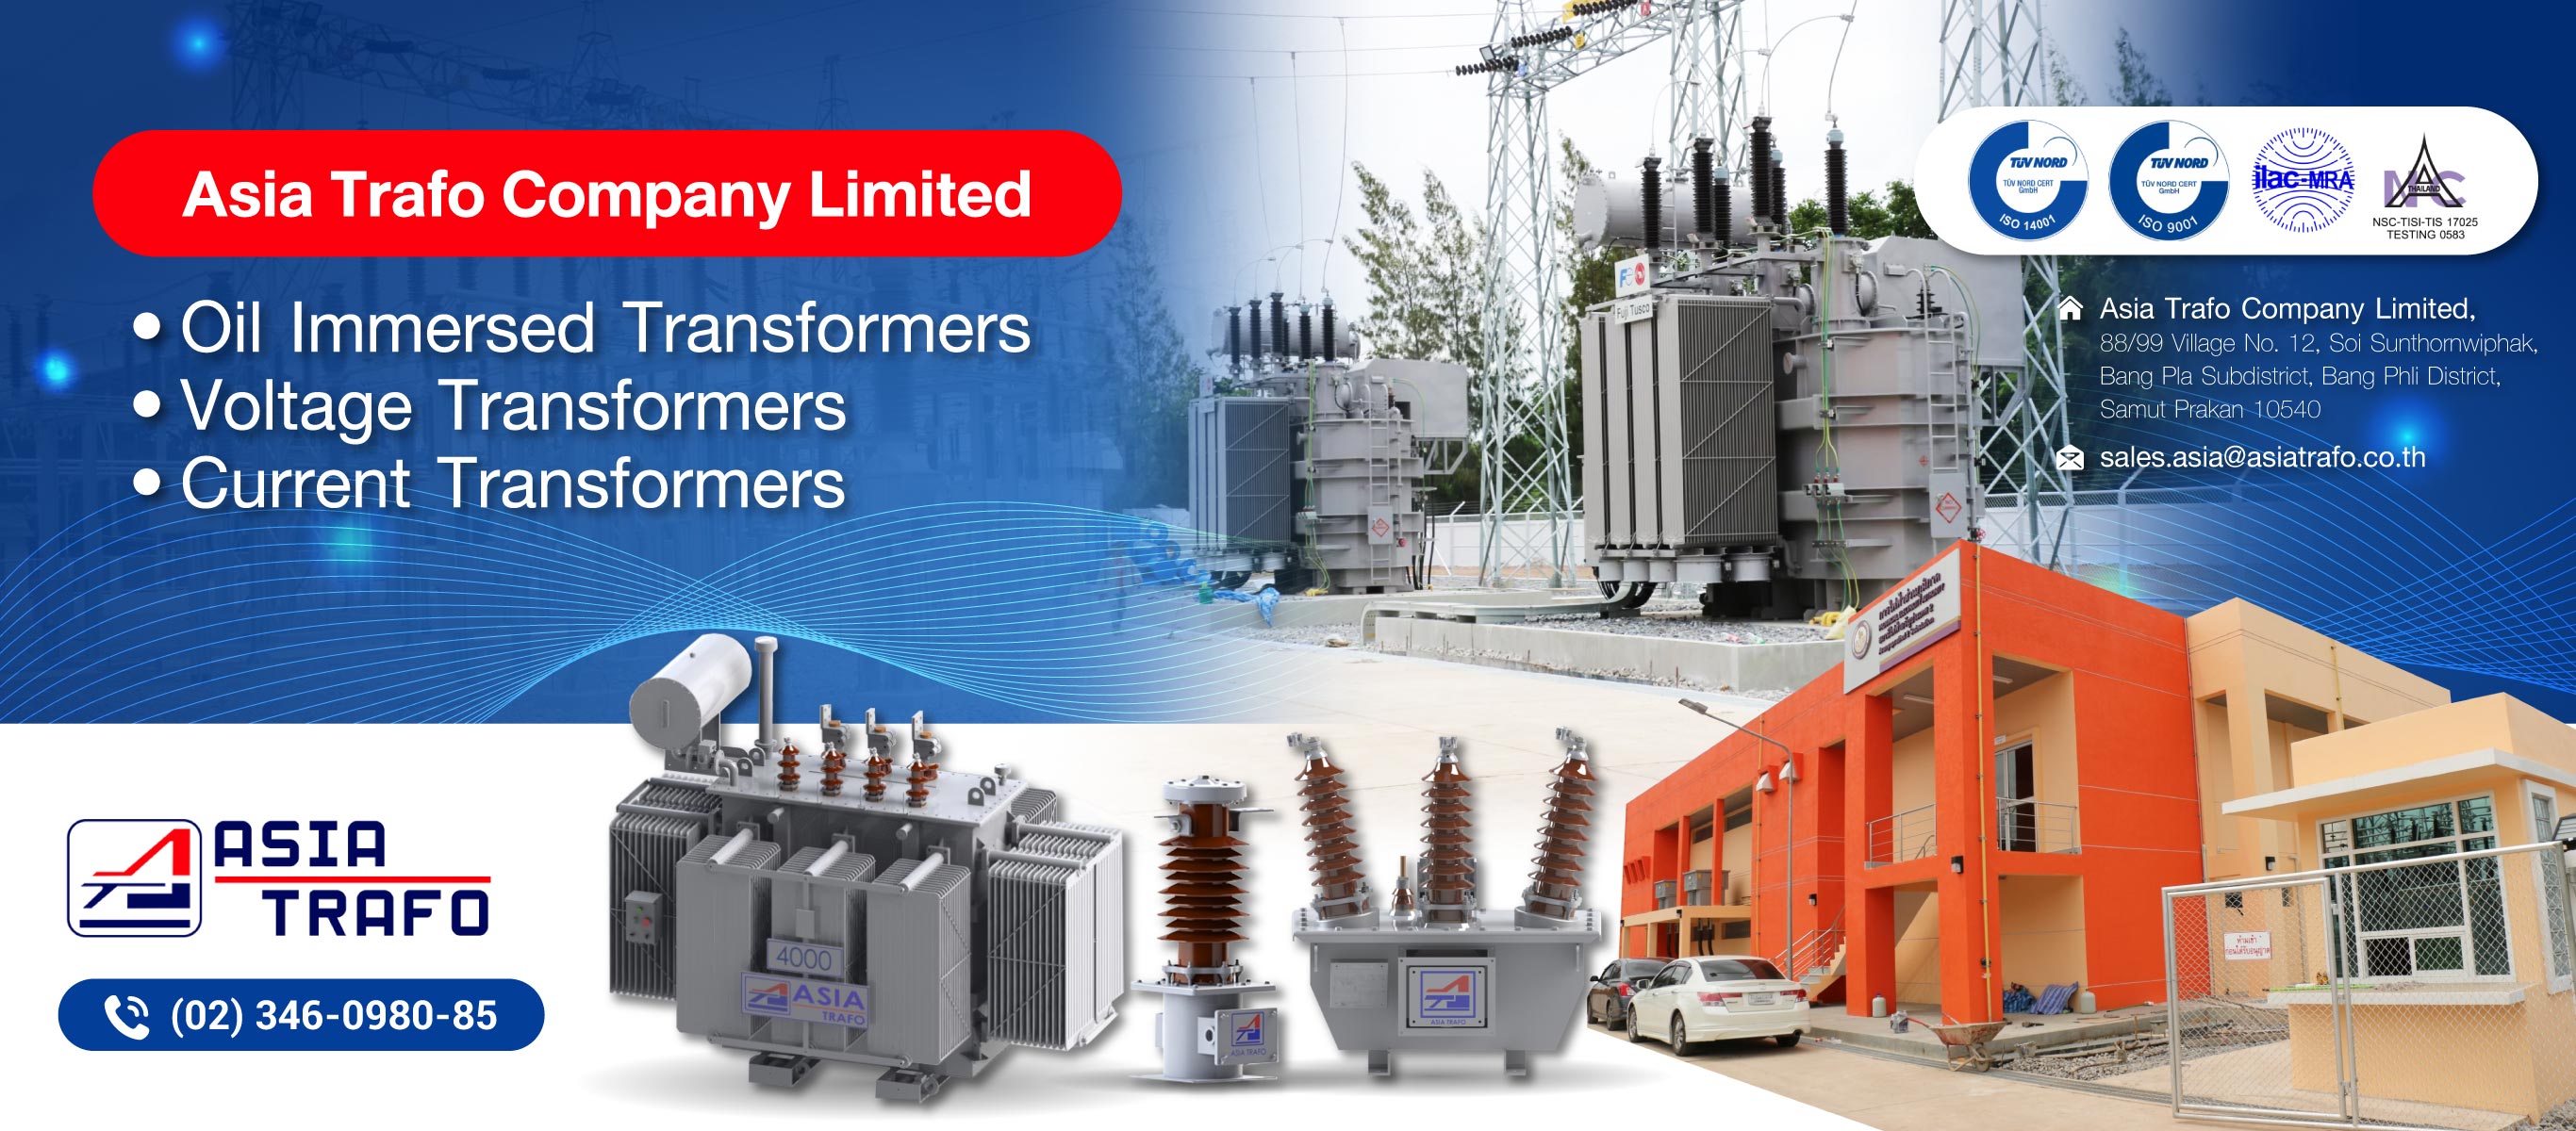 Asia Trafo's electrical transformers